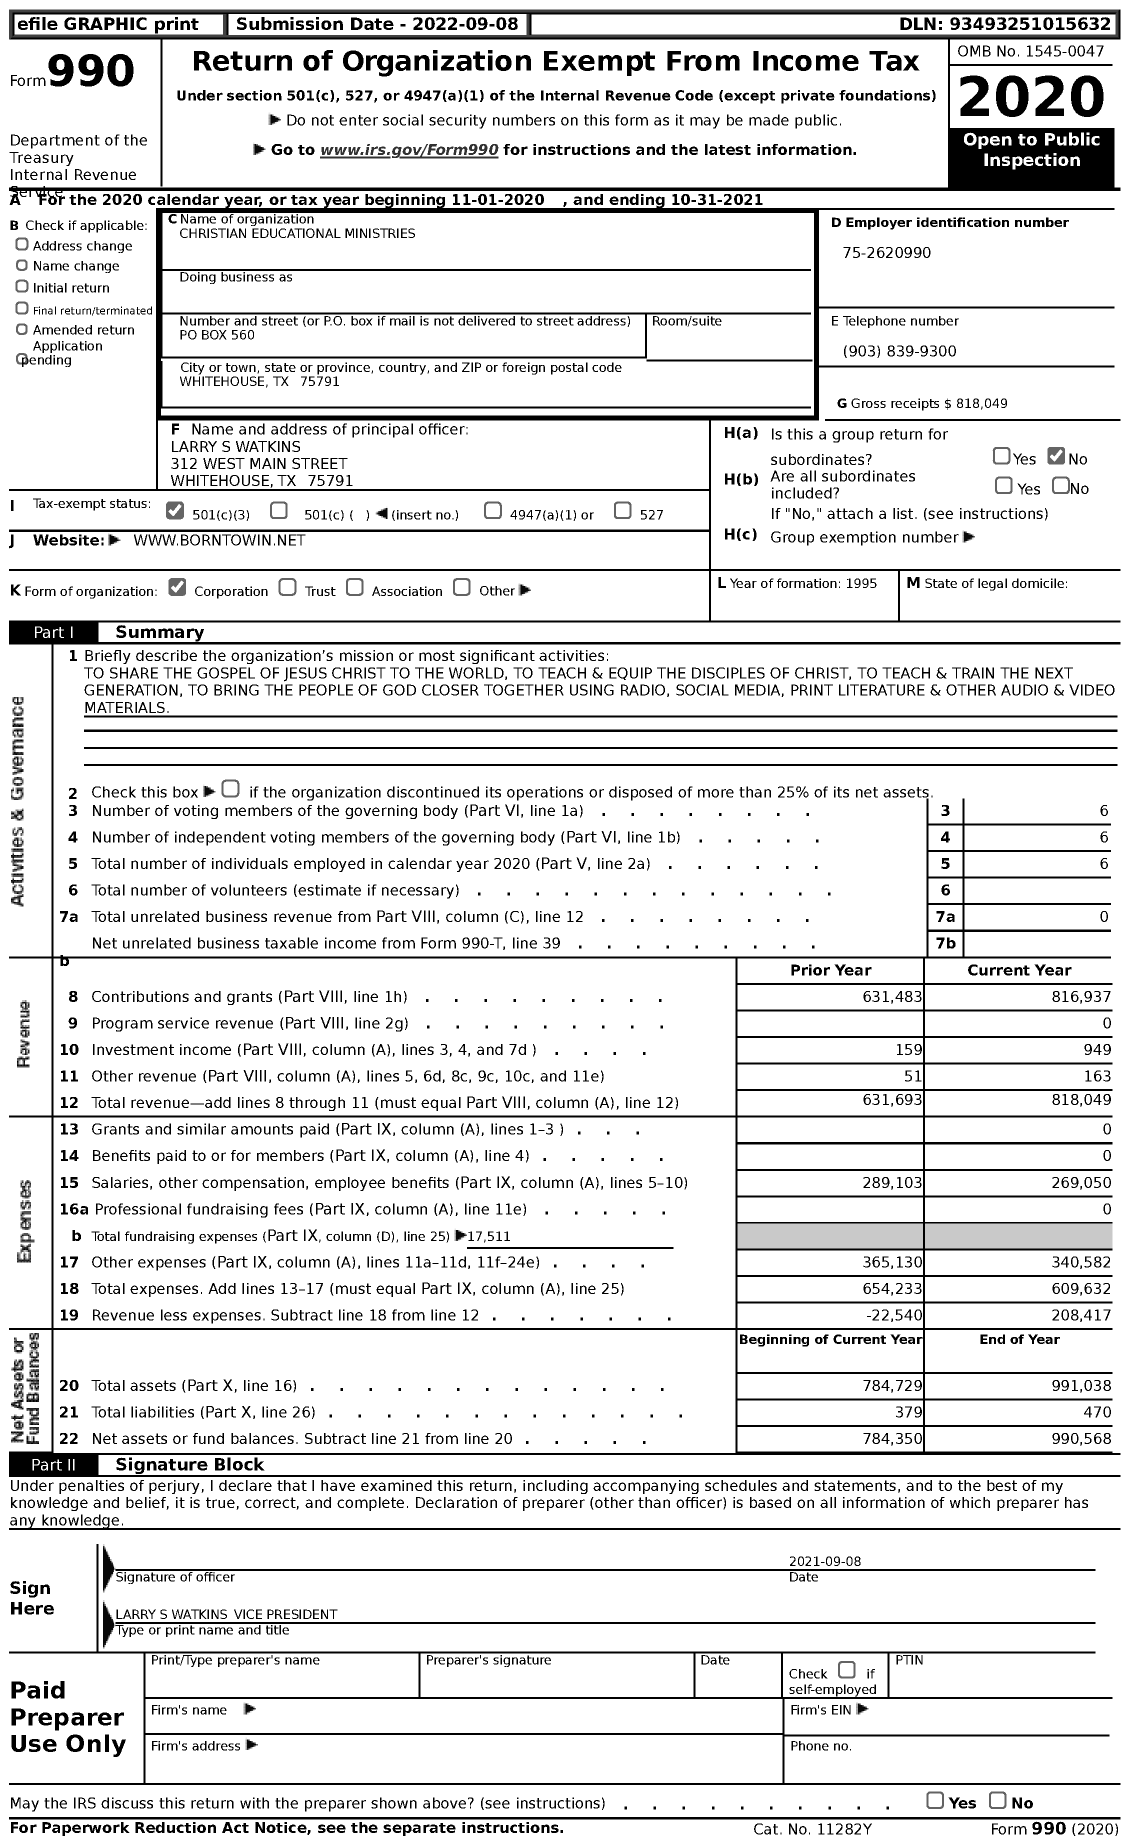 Image of first page of 2020 Form 990 for Christian Educational Ministries